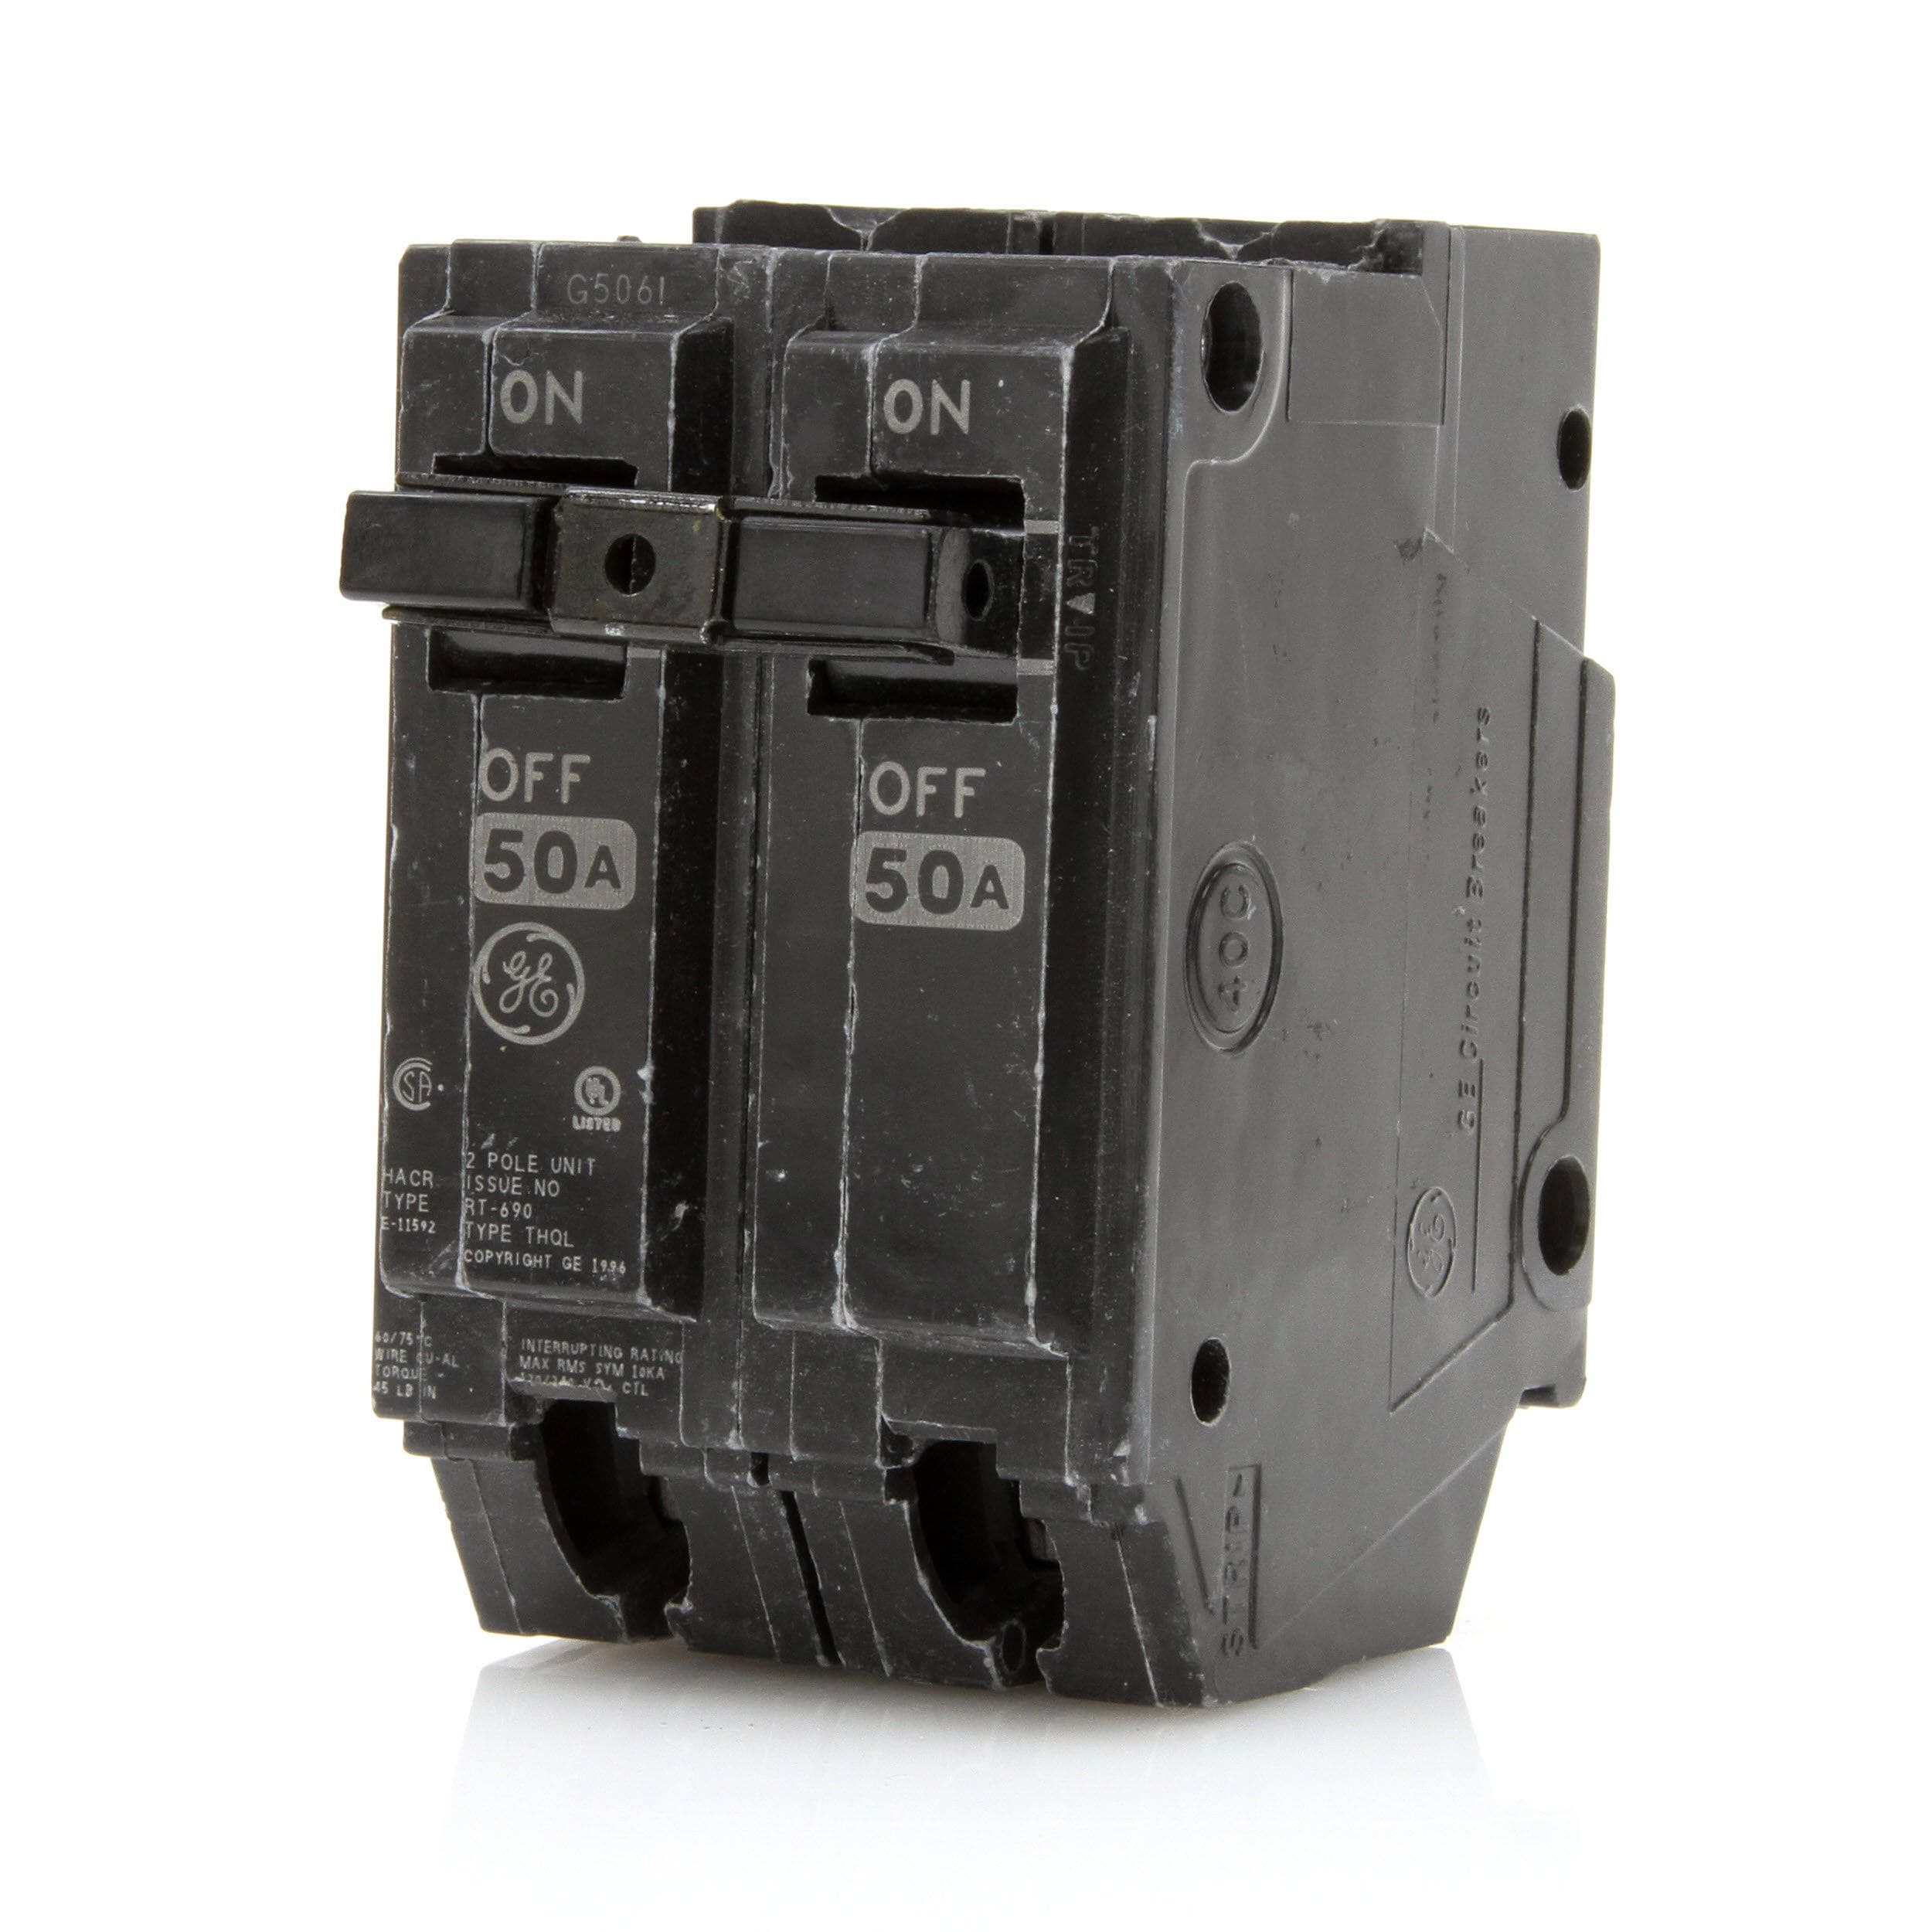 GE General Electric Circuit Breaker 50a 2 Pole Rt-660 for sale online 